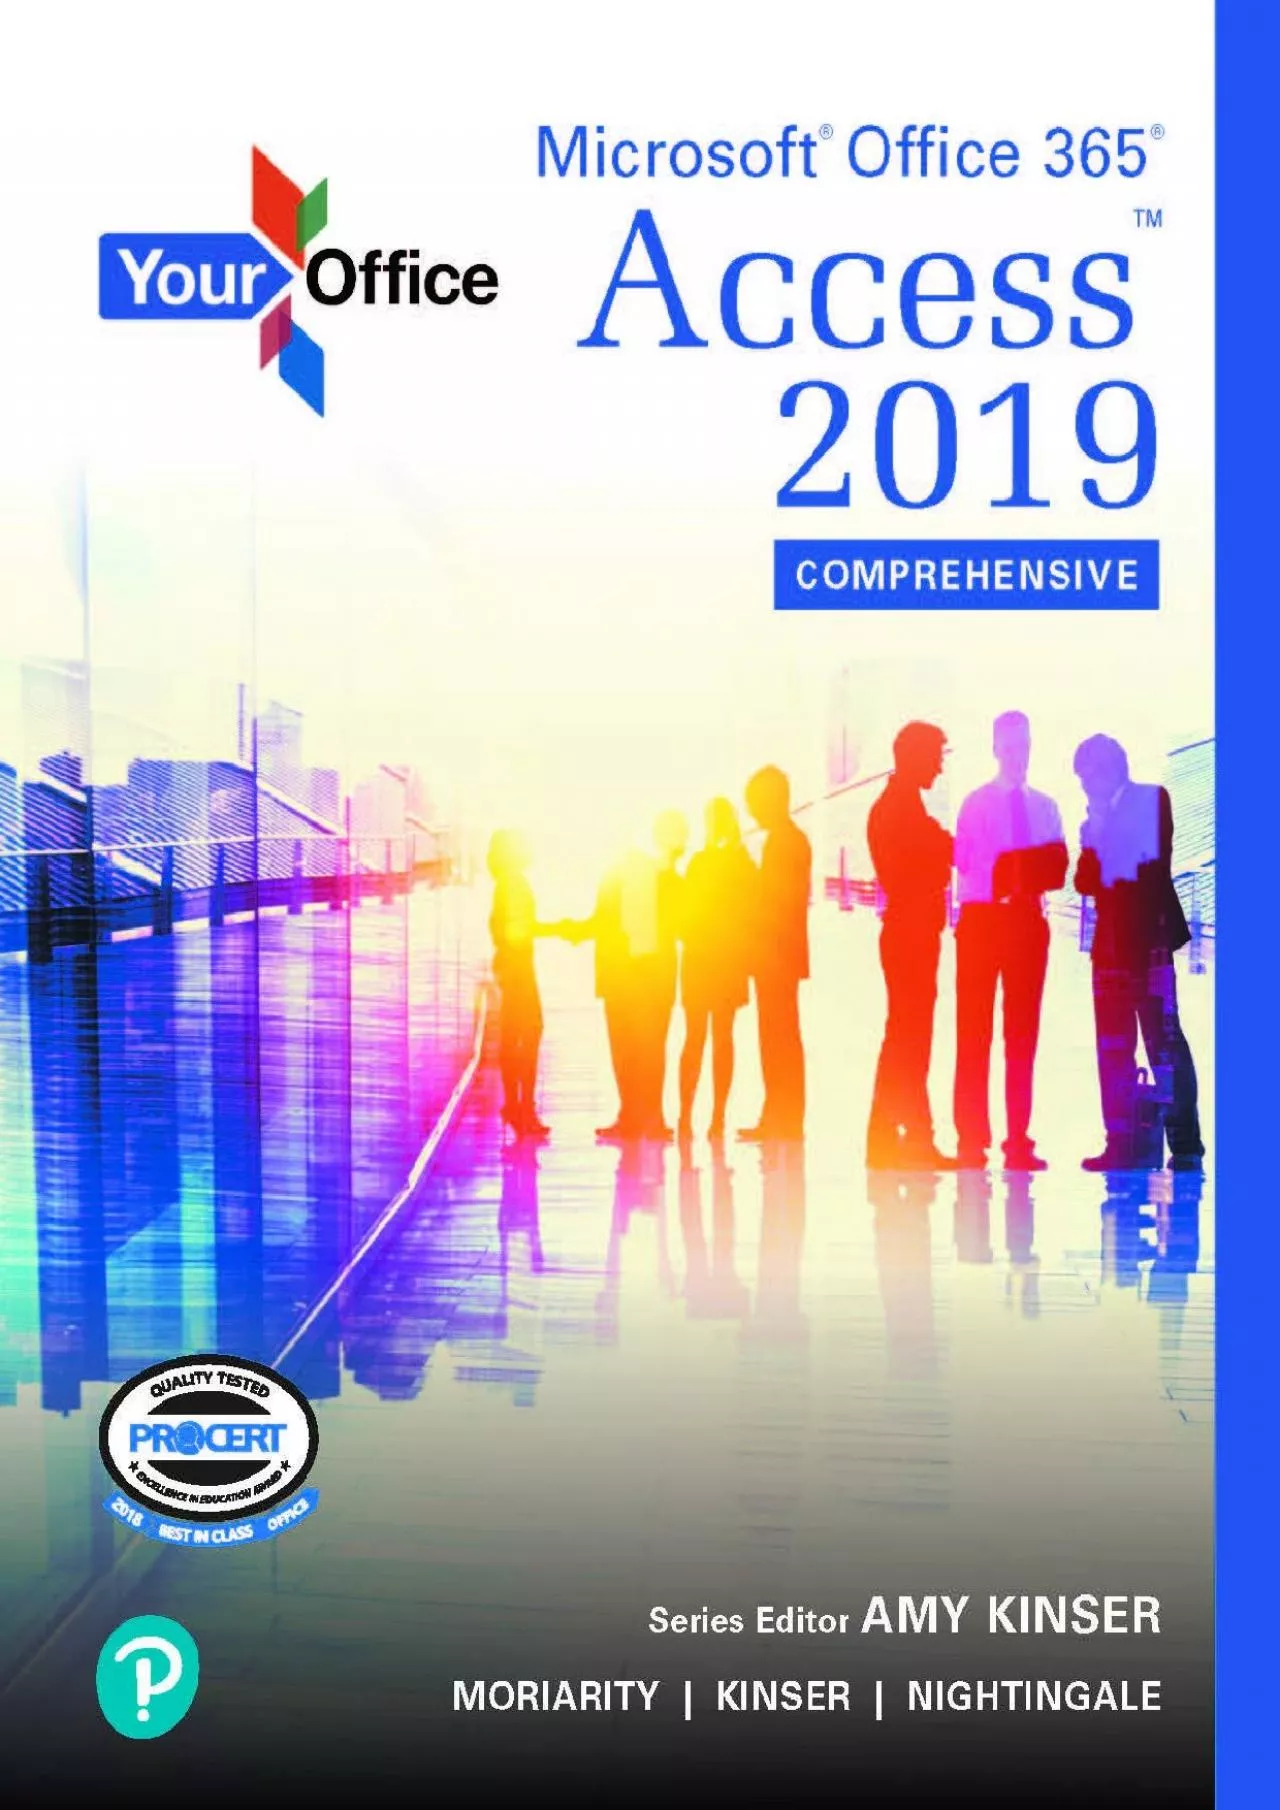 (EBOOK)-Your Office: Microsoft Office 365, Access 2019 Comprehensive